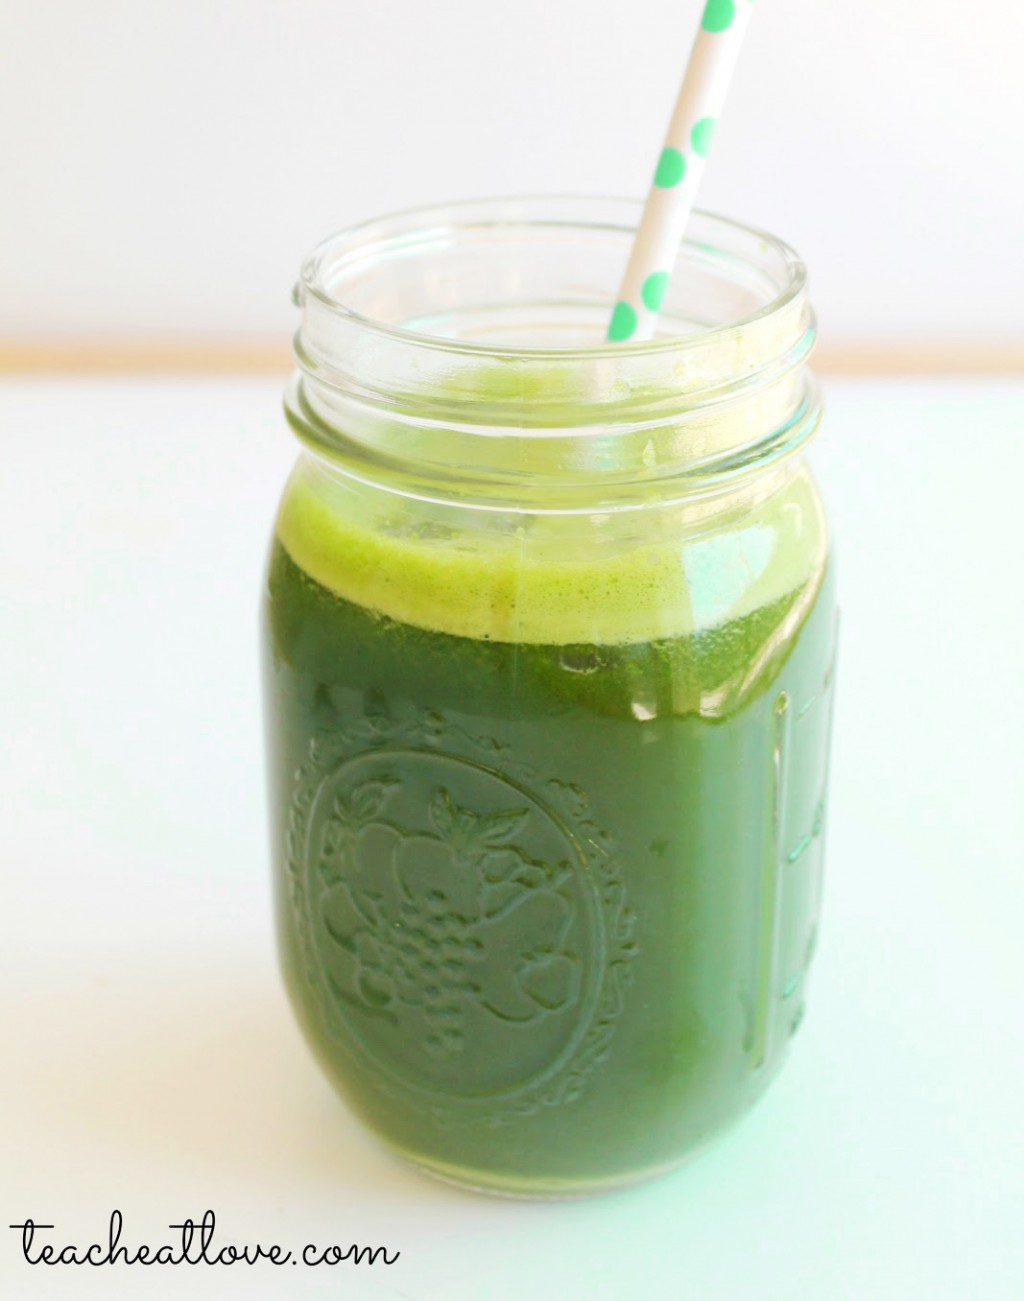 Pressed Juicery’s Green Juice Recipe by Colleen Hill